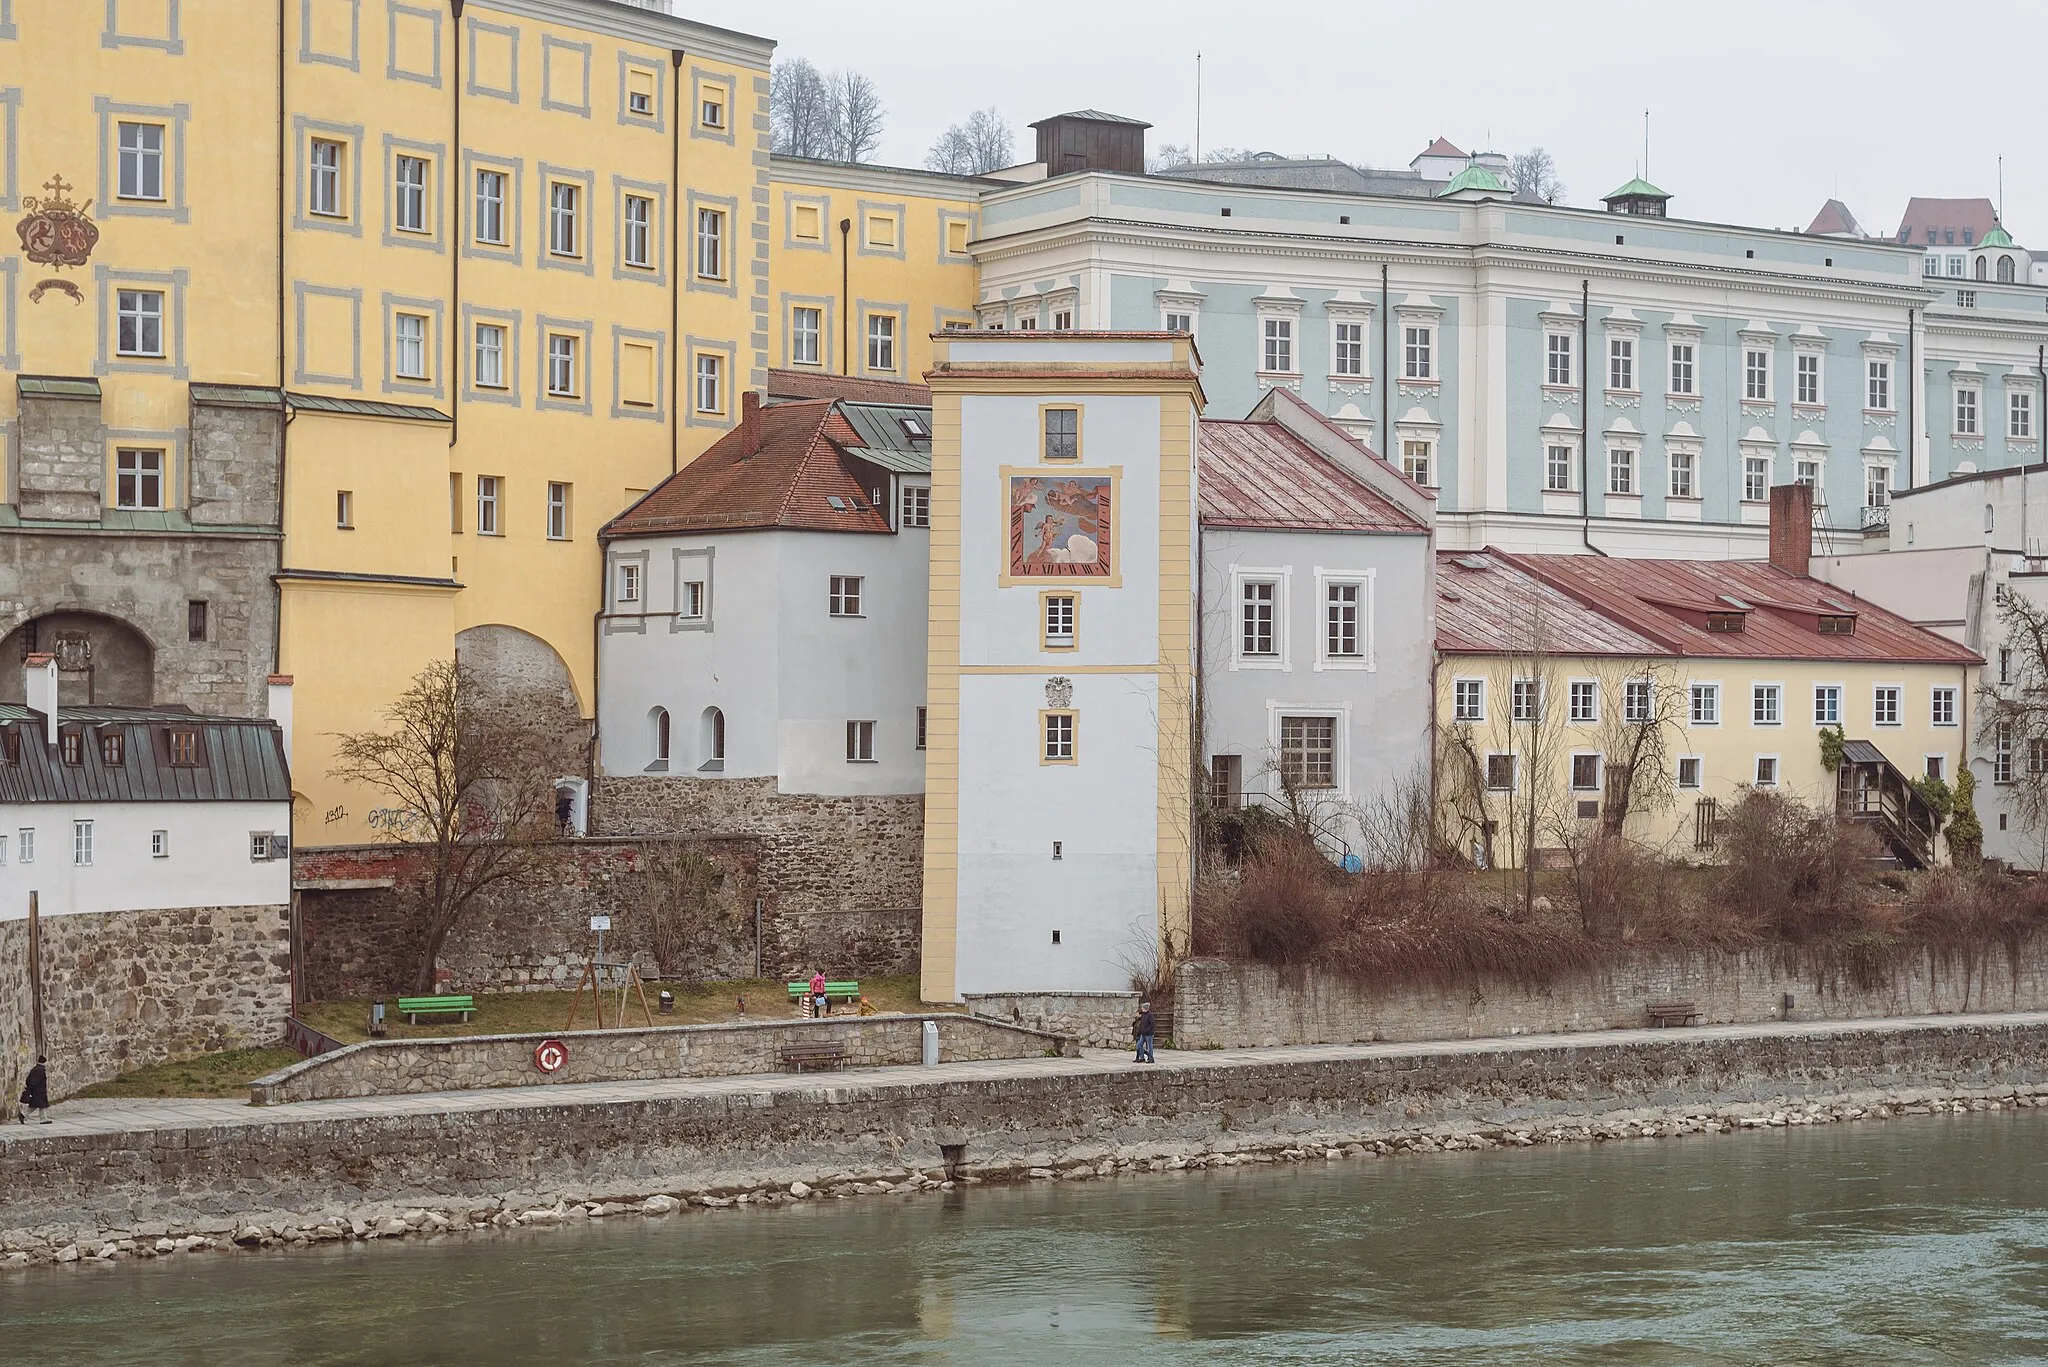 Photo showing: View across the Inn to the building at the Innbrückgasse 13-13a in Passau.